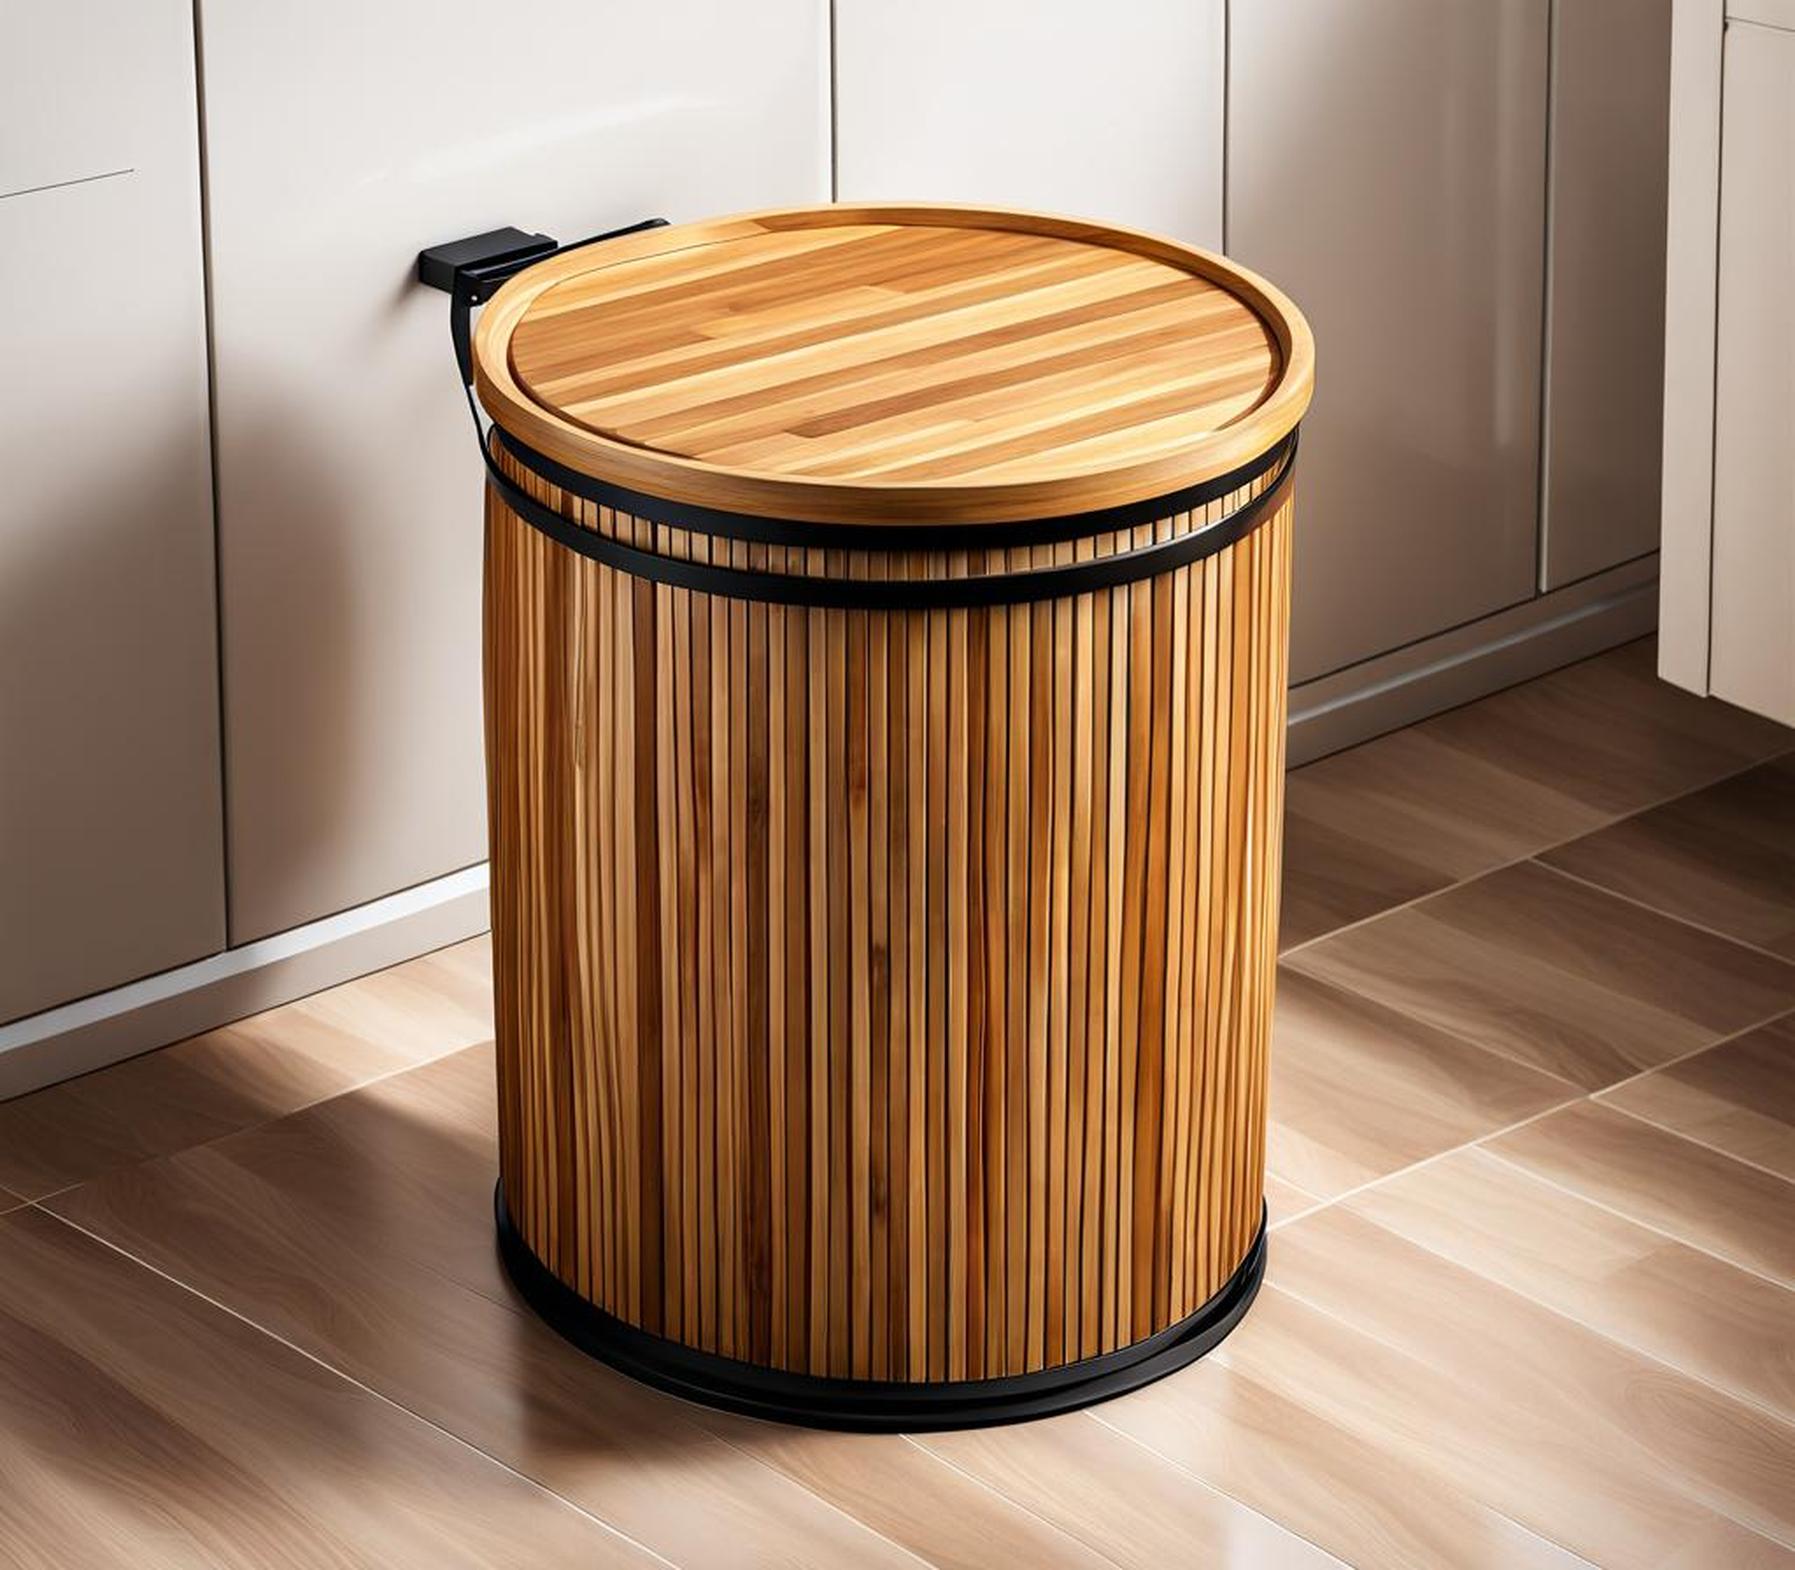 Spruce Up Your Bathroom With a Stylish Wooden Trash Can